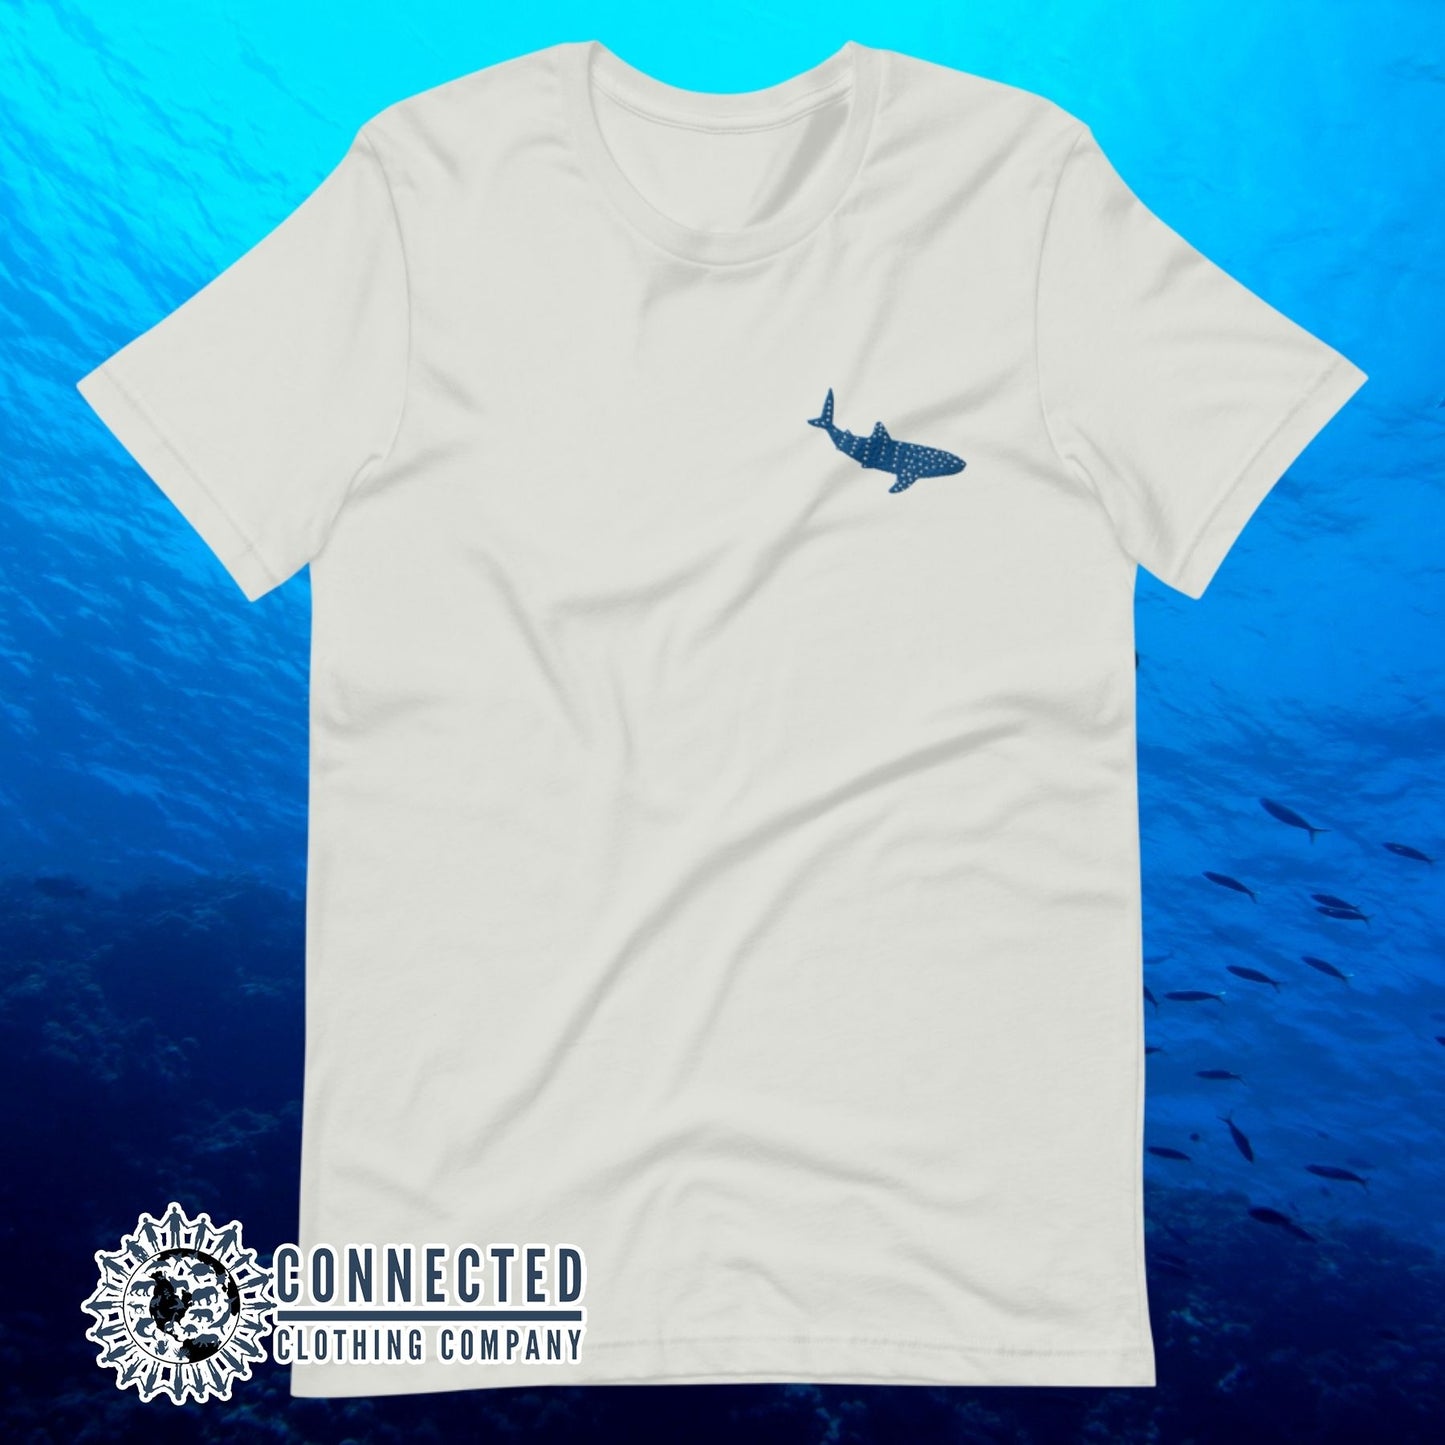 Silver Embroidered Whale Shark Short-Sleeve Shirt - sweetsherriloudesigns - Ethically and Sustainably Made - 10% of profits donated to shark conservation and ocean conservation